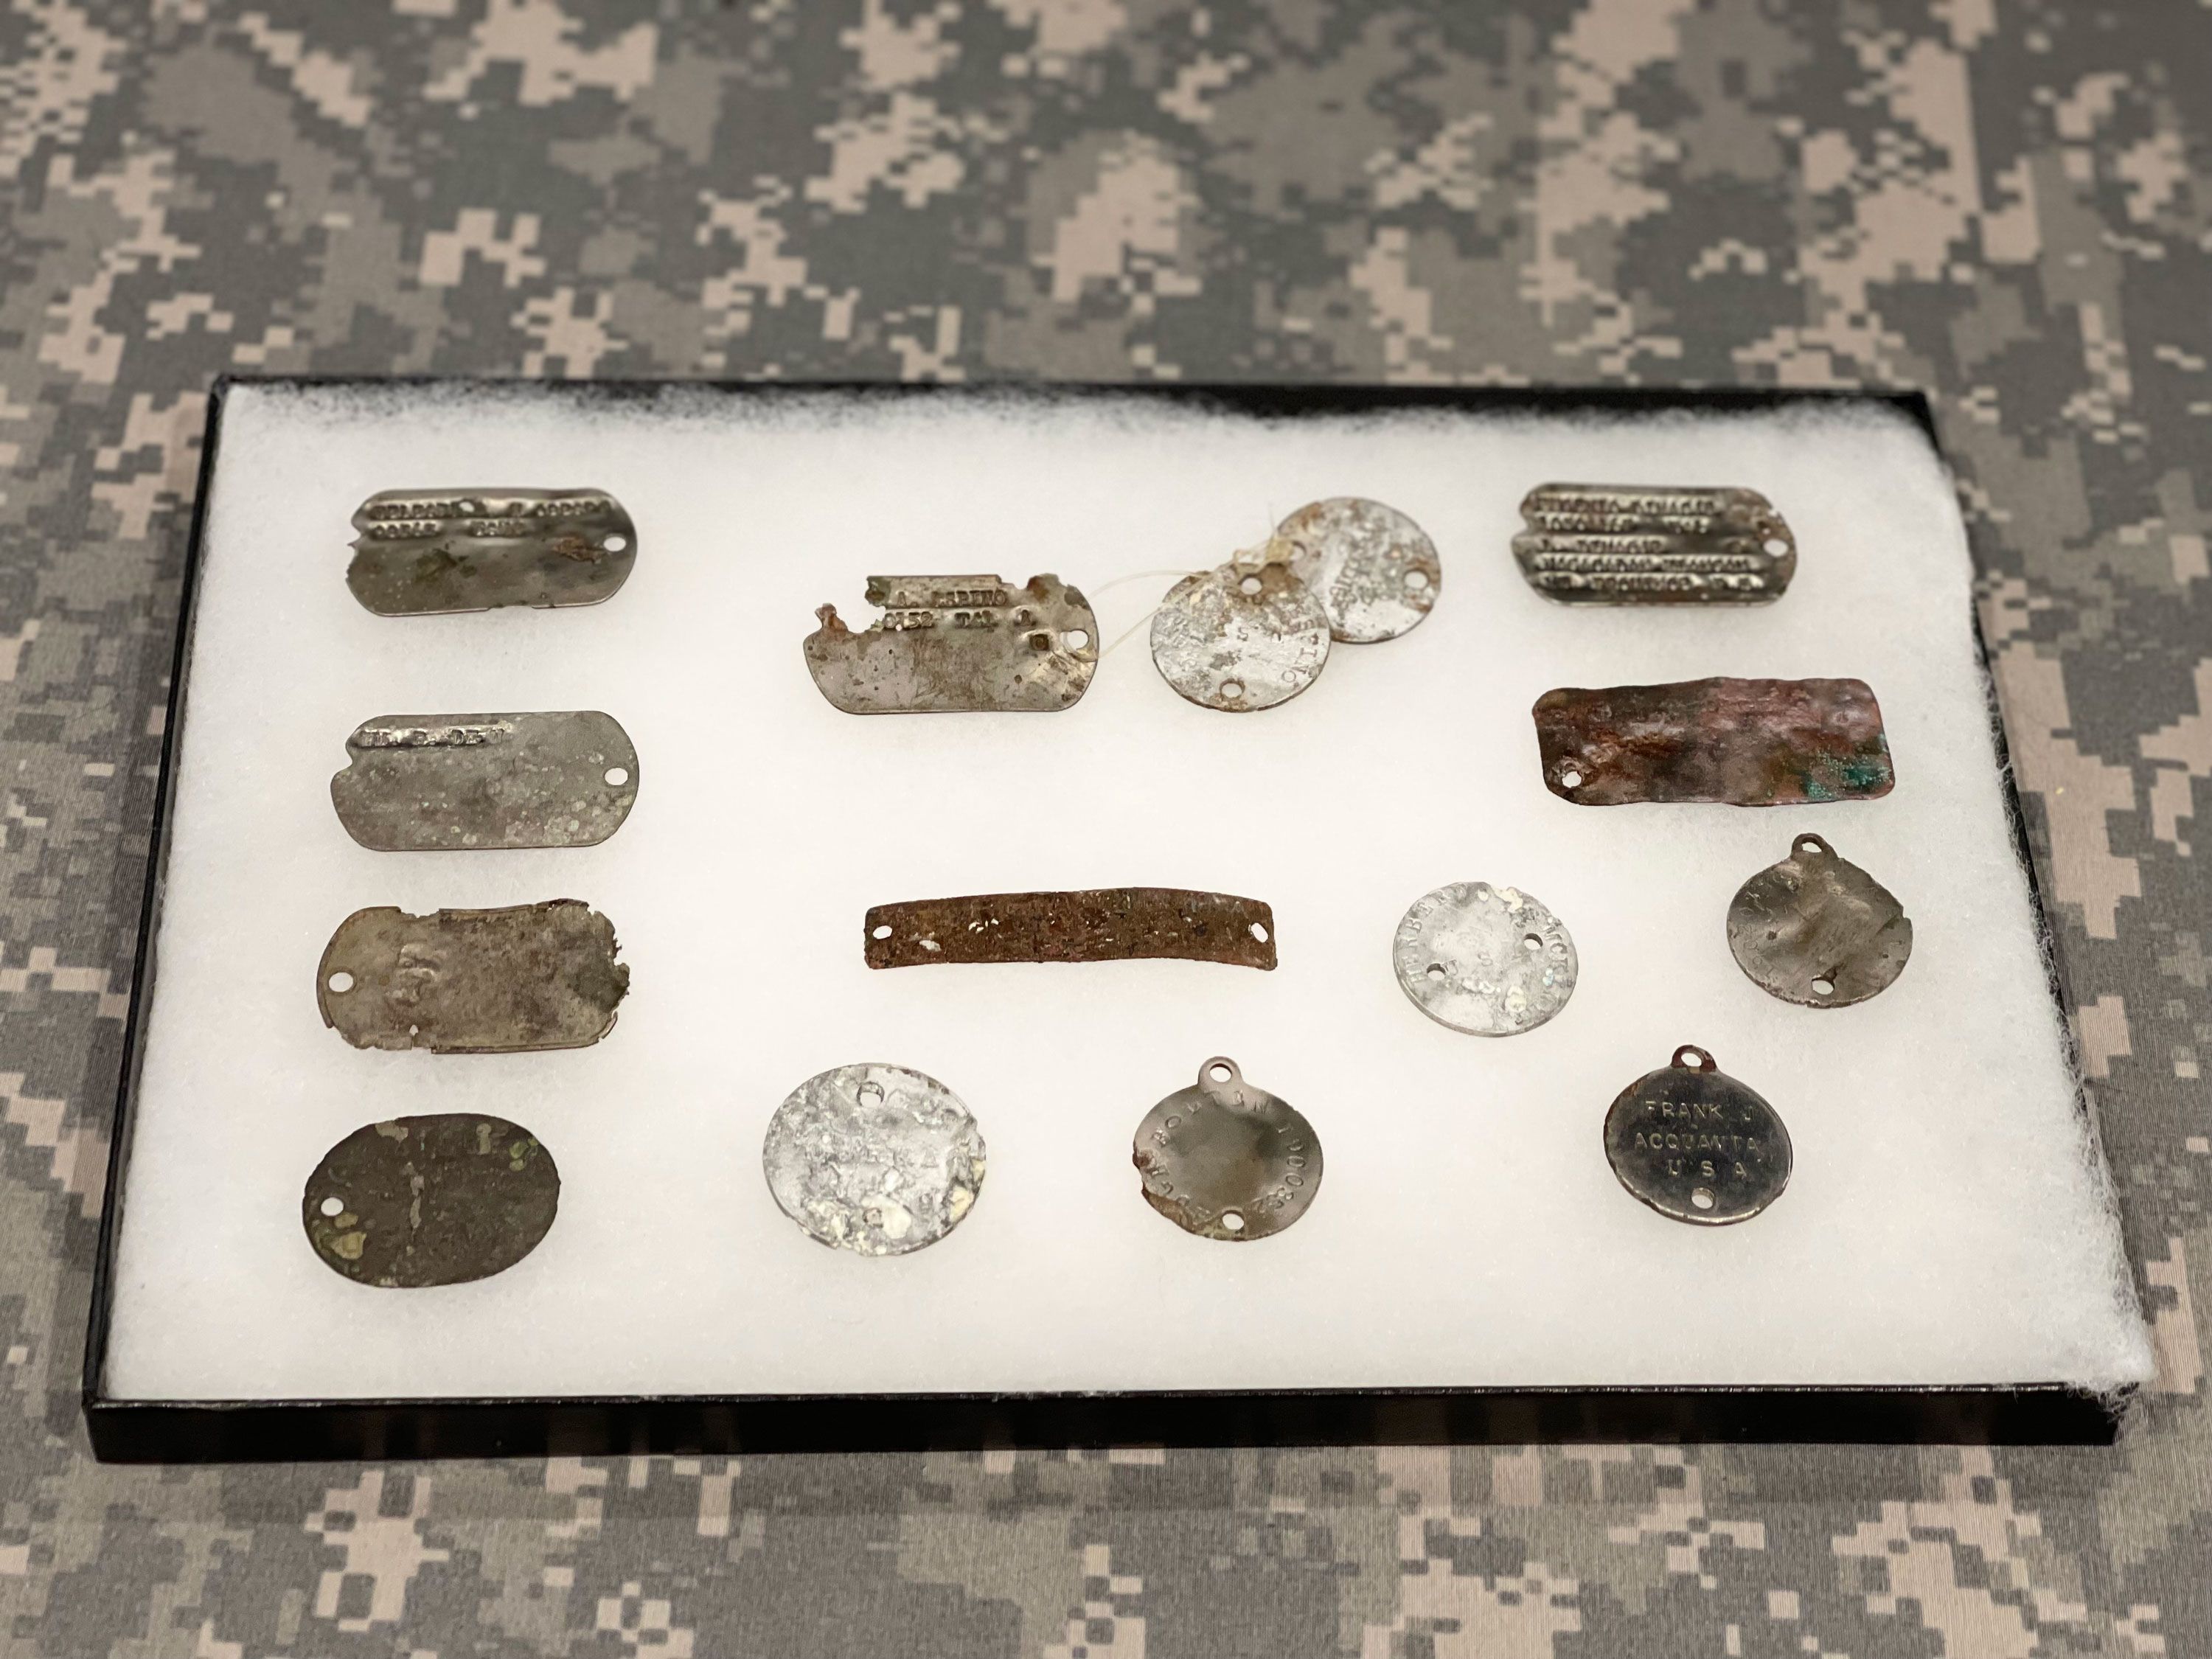 Veterans Day: Military dog tags pack a lot of information into small space  – The Fort Morgan Times